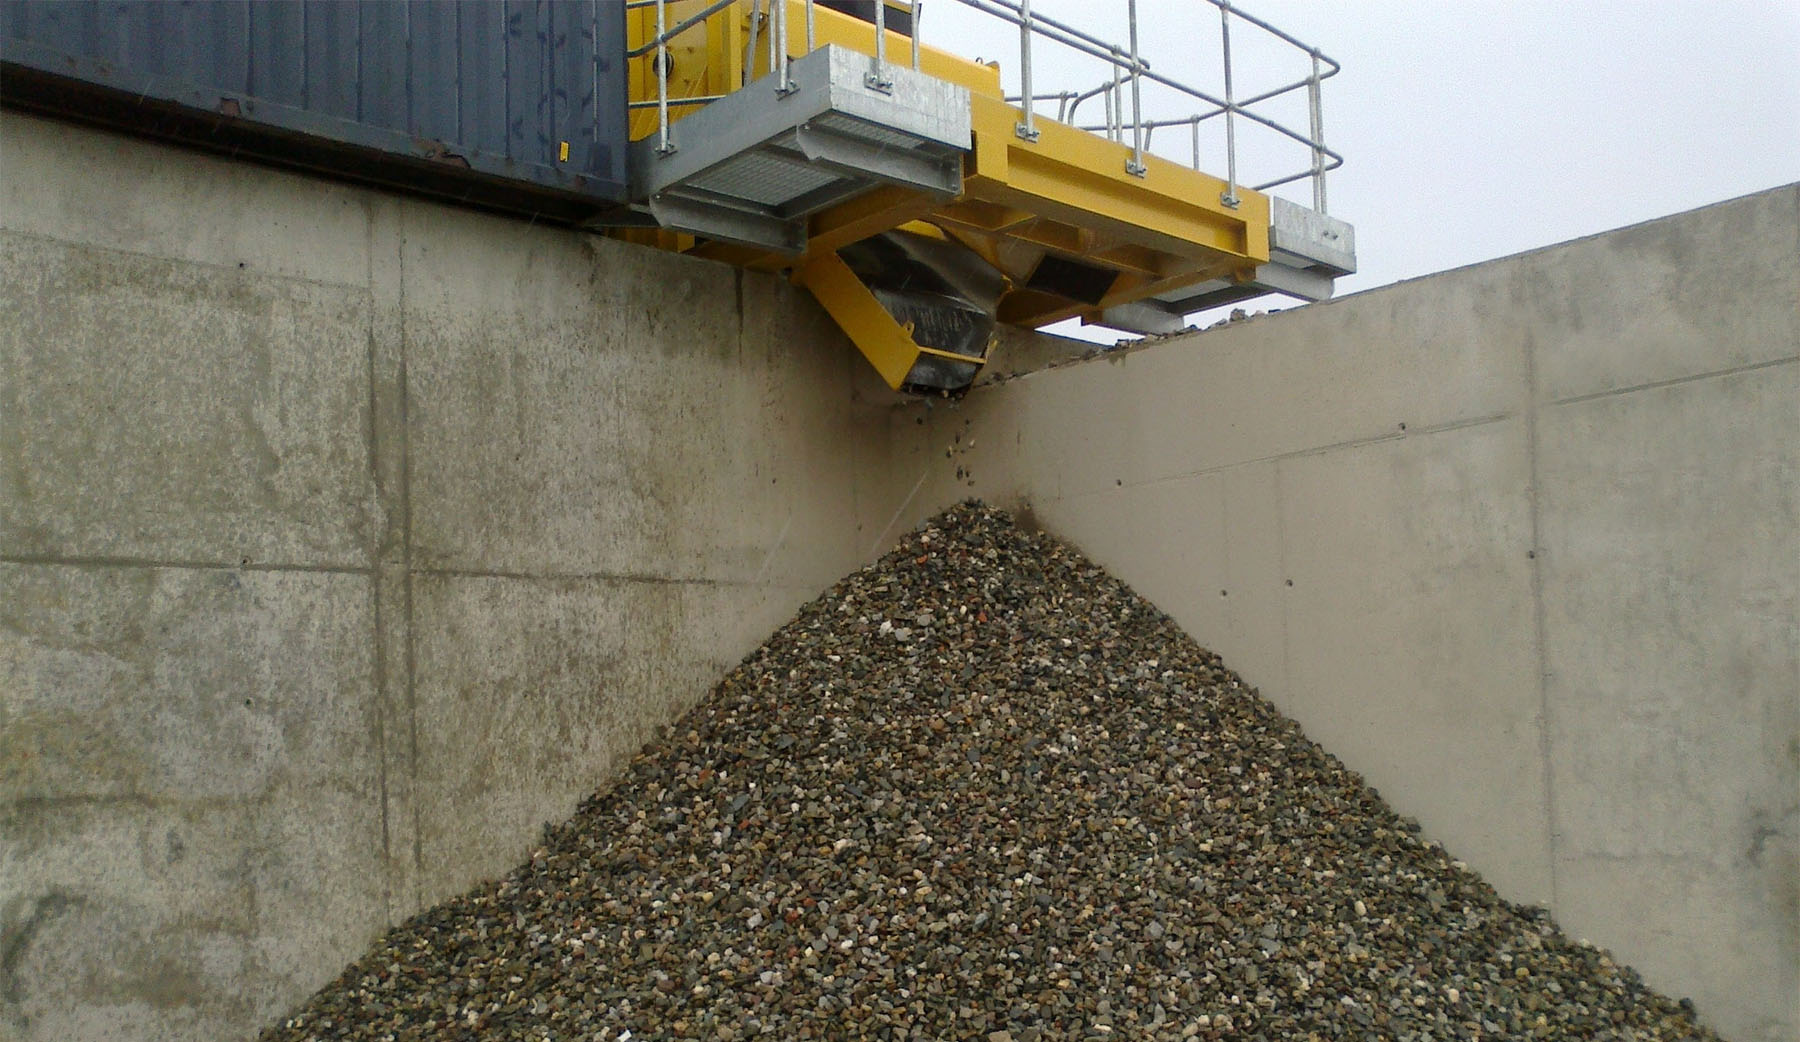 large machines used to break down concrete into aggregate